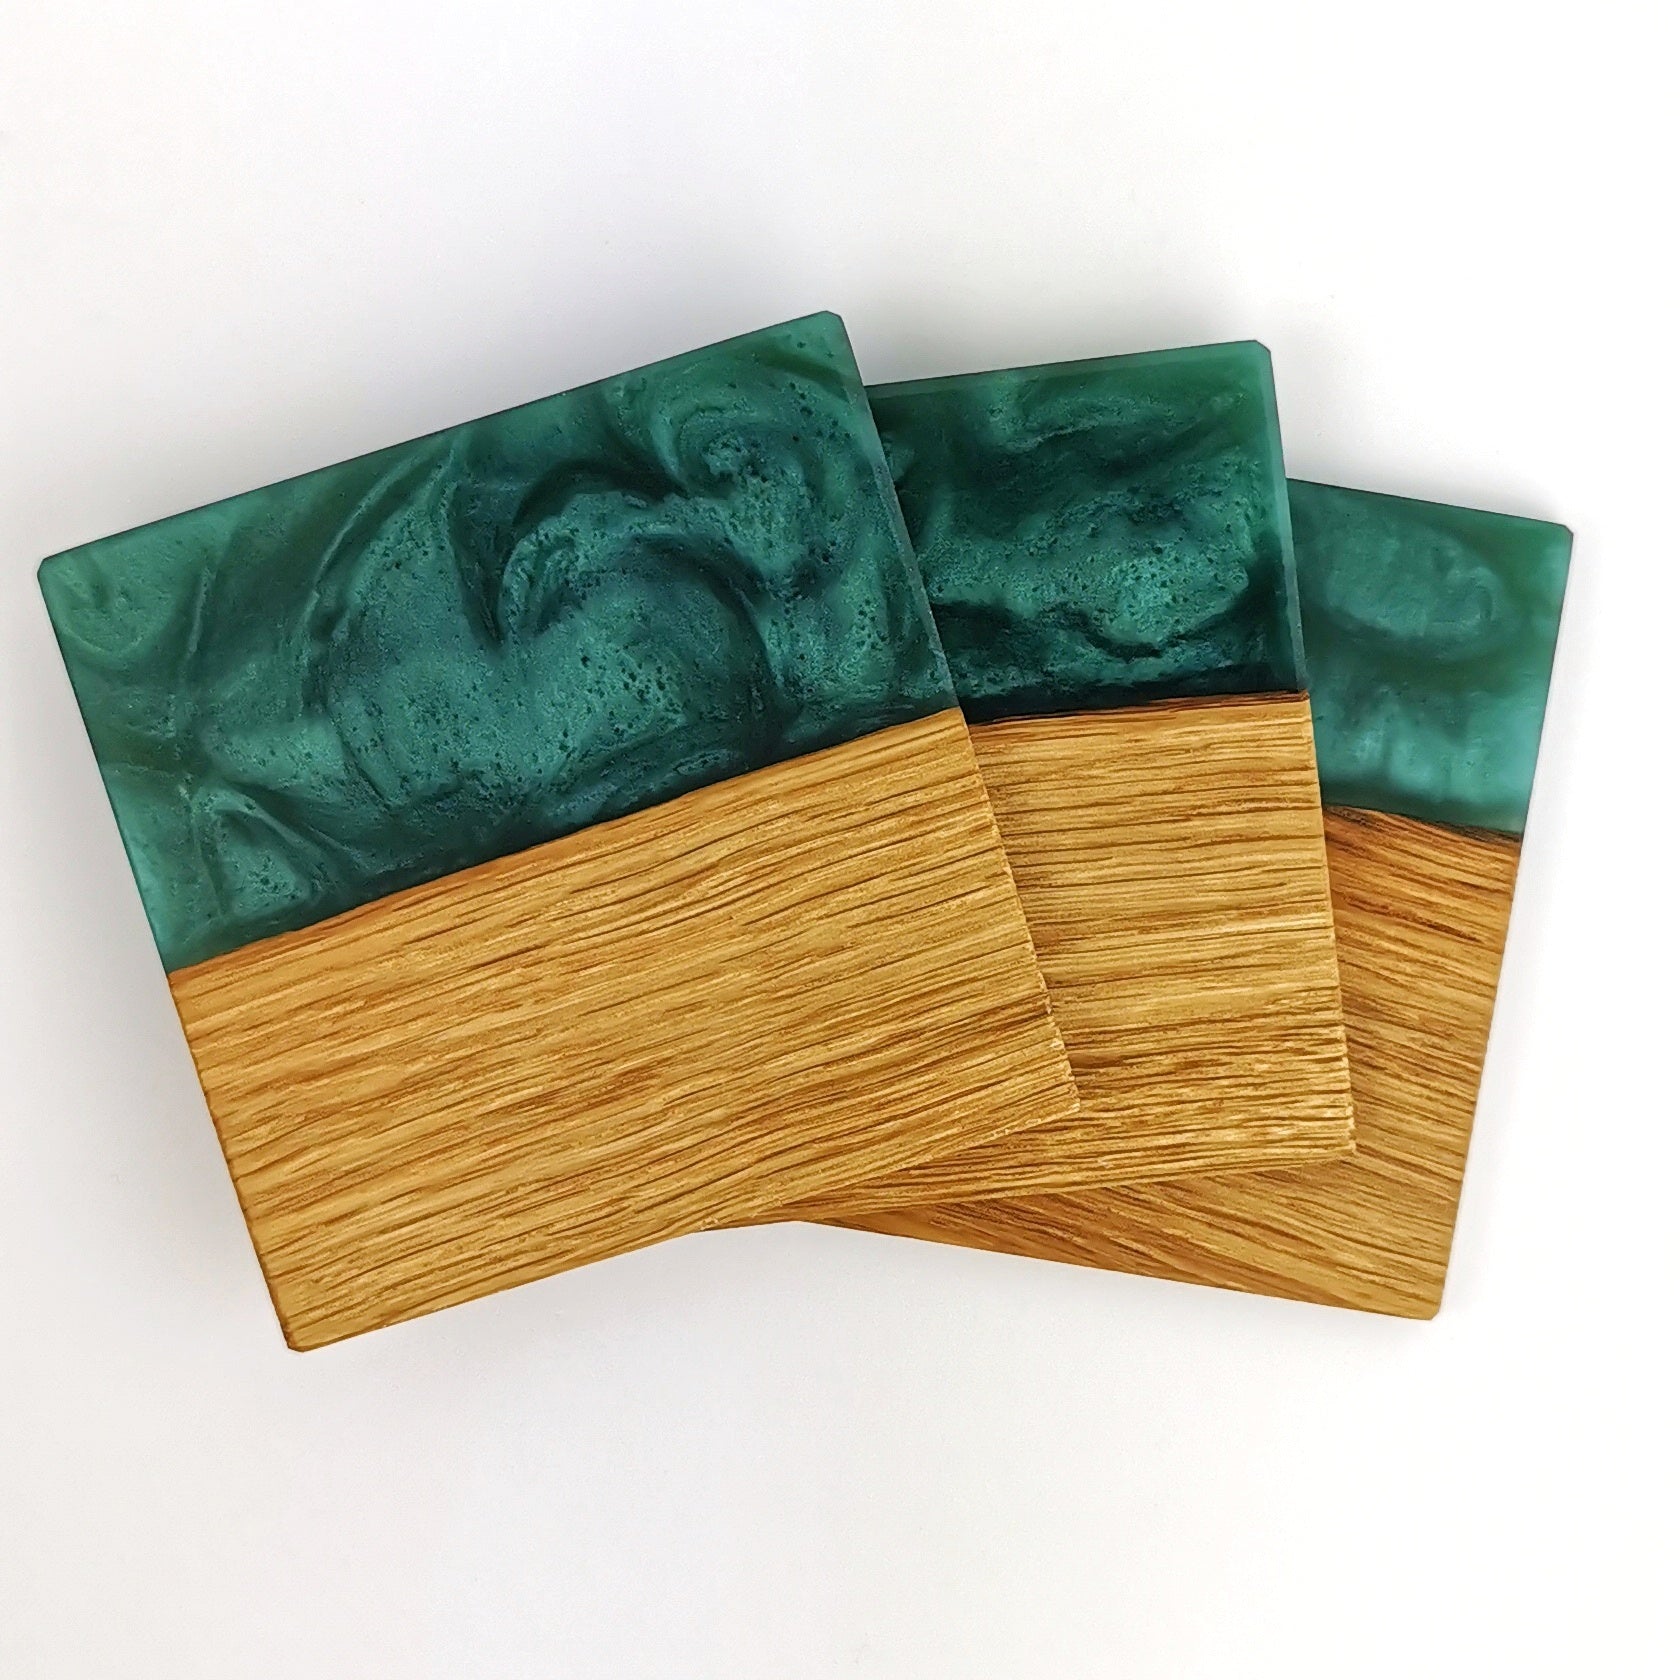 Handcrafted Wooden Drink Coasters, Handmade Epoxy Resin Art, Oak Wood  Slices With Holder, Coaster Table Setting Decor, Holiday Gift Ideas –  Ceramic Connoisseur